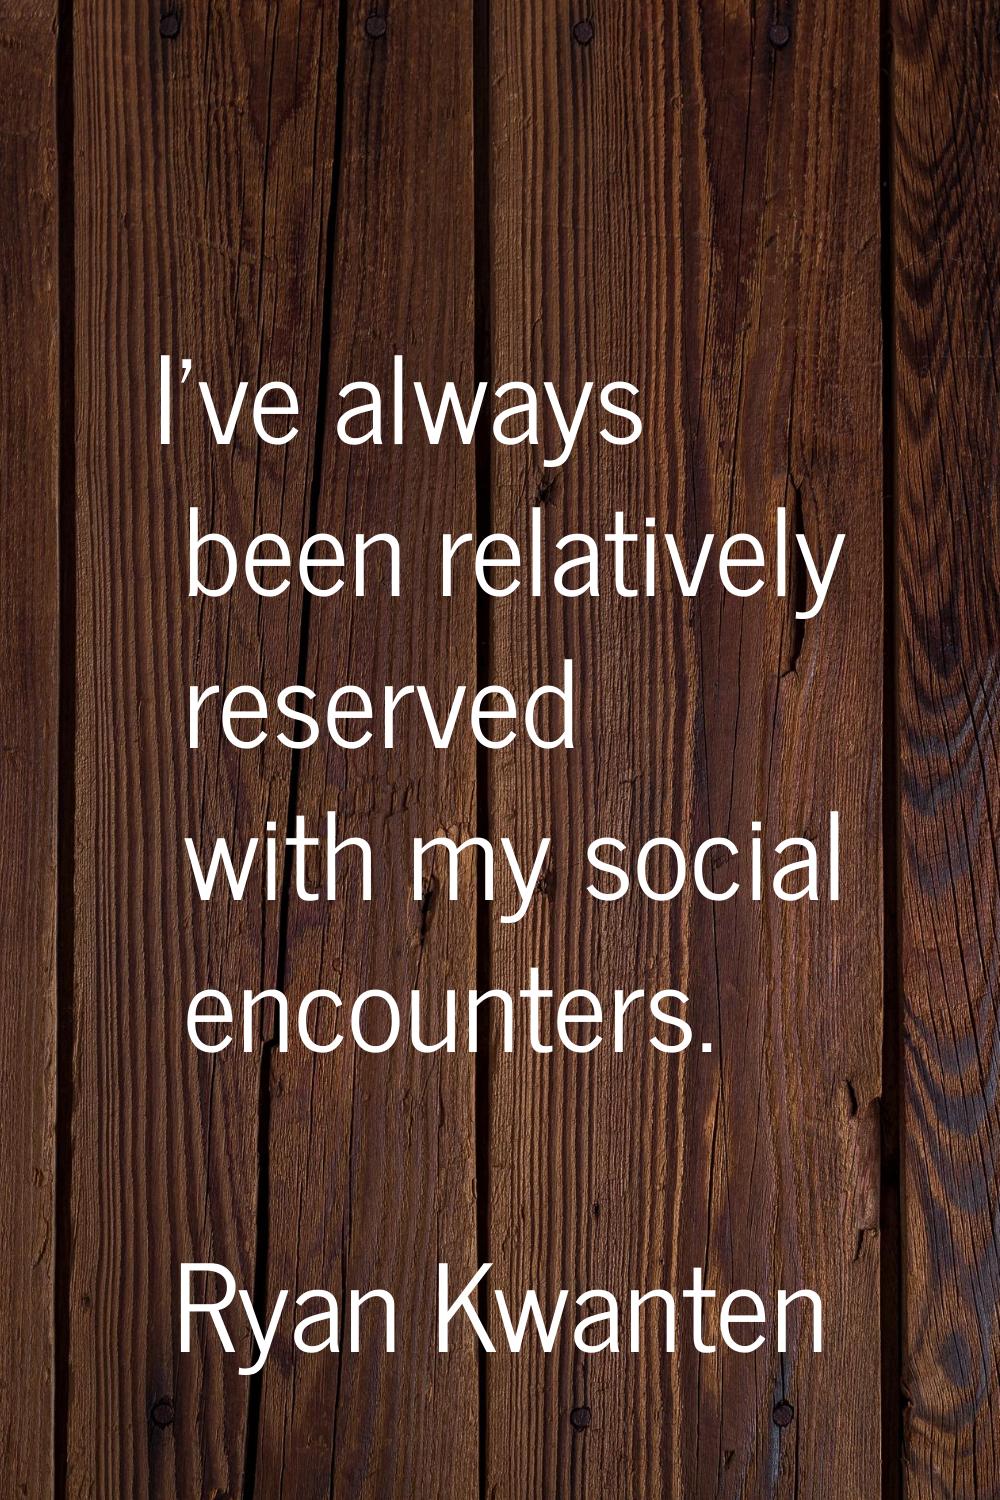 I've always been relatively reserved with my social encounters.